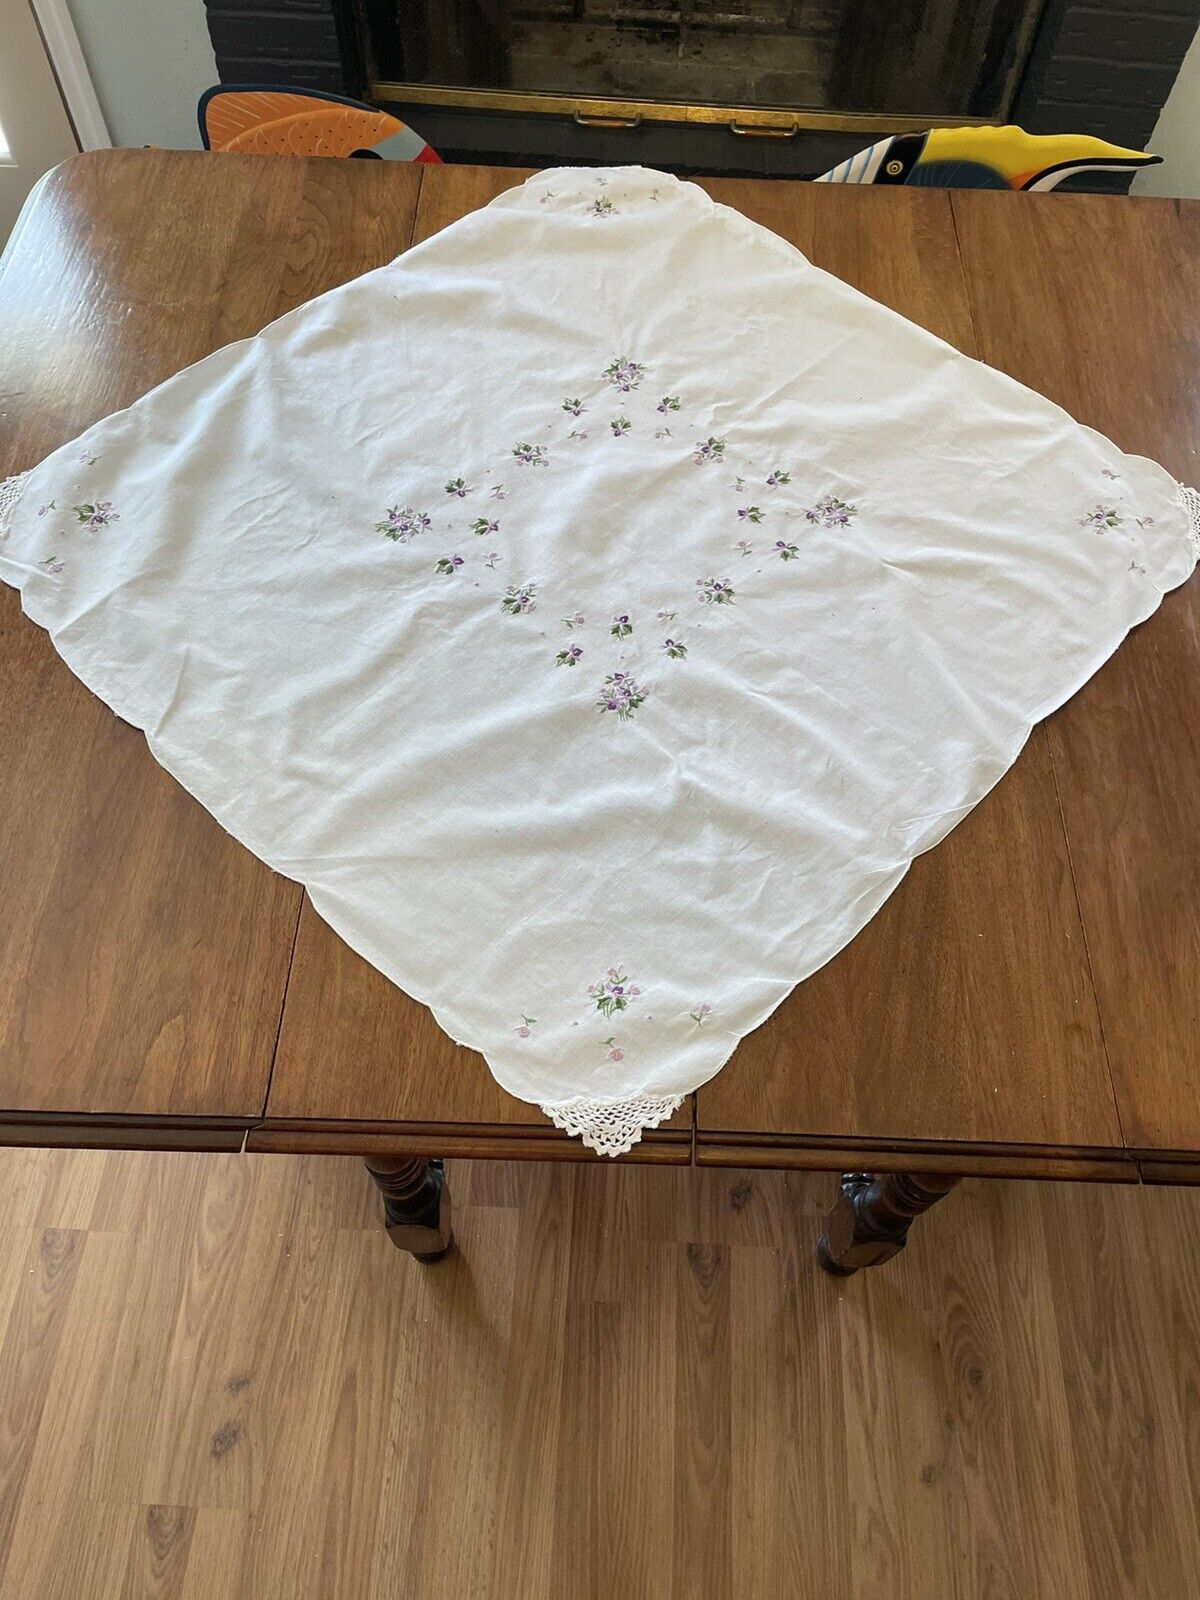 ANTIQUE Gorgeous Vintage Hand Embroidered Tablecloth 31x31” Sweet Purple Flowers